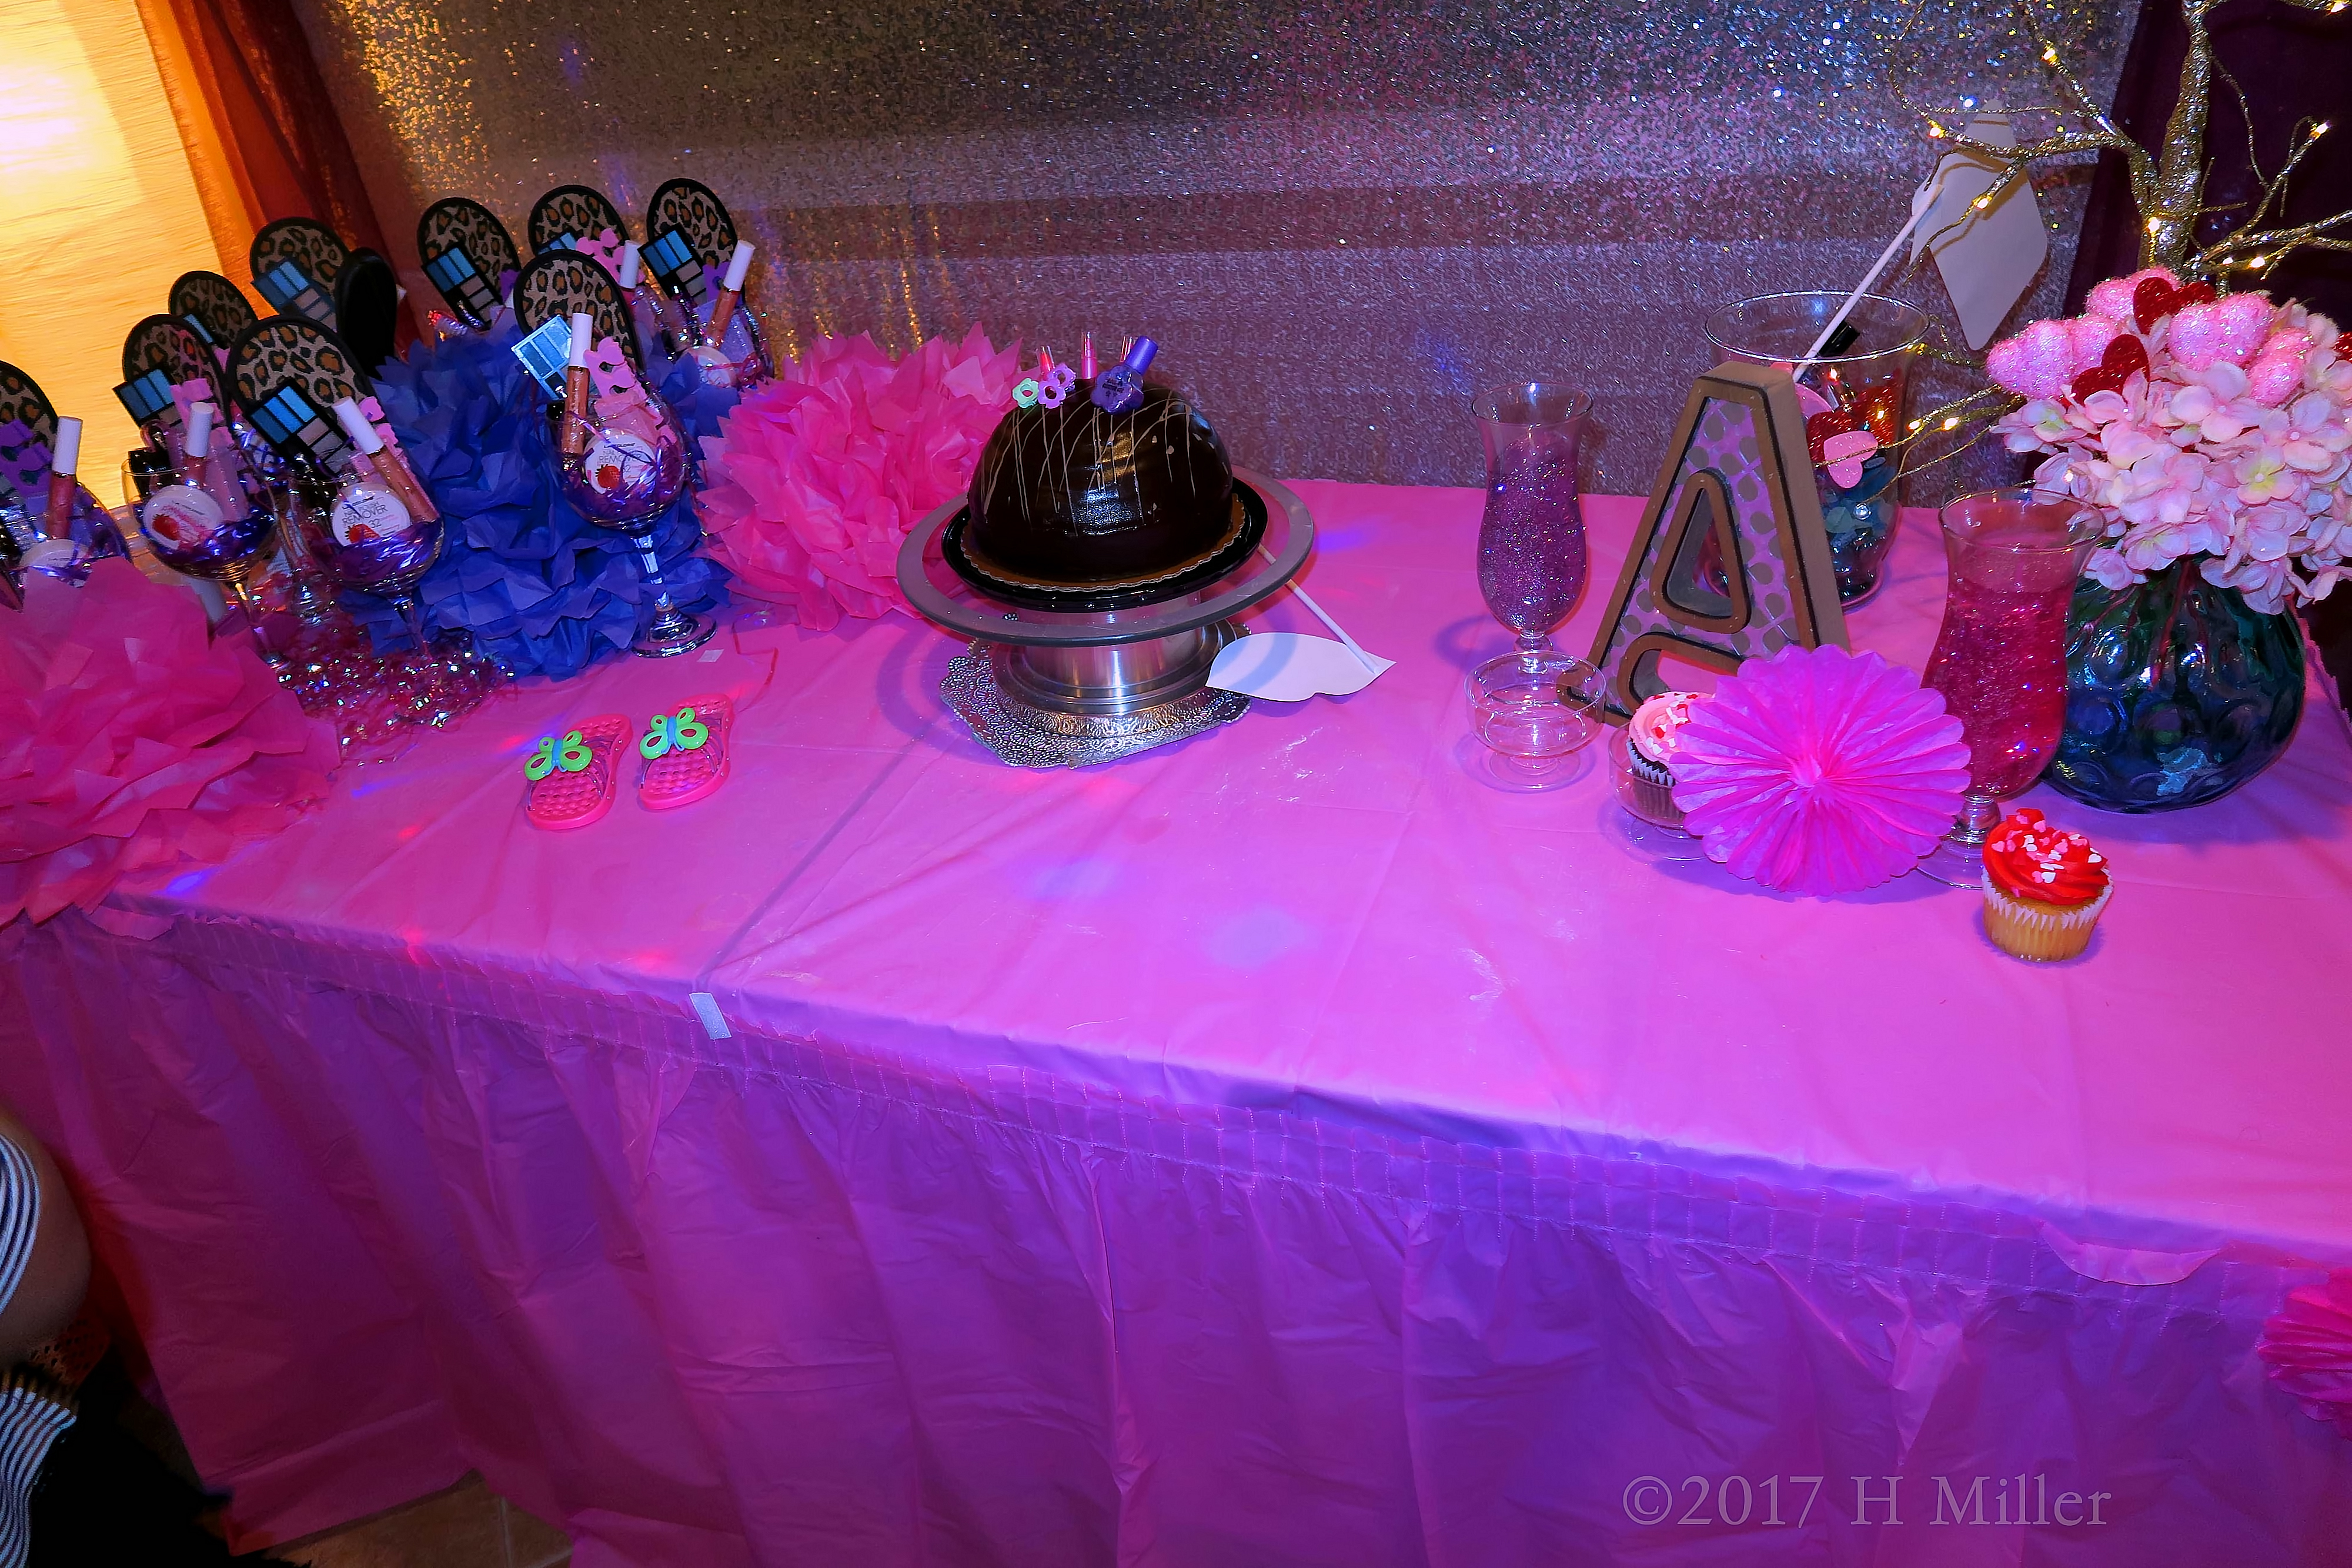 The Kids Spa Treat And Cake Table. 